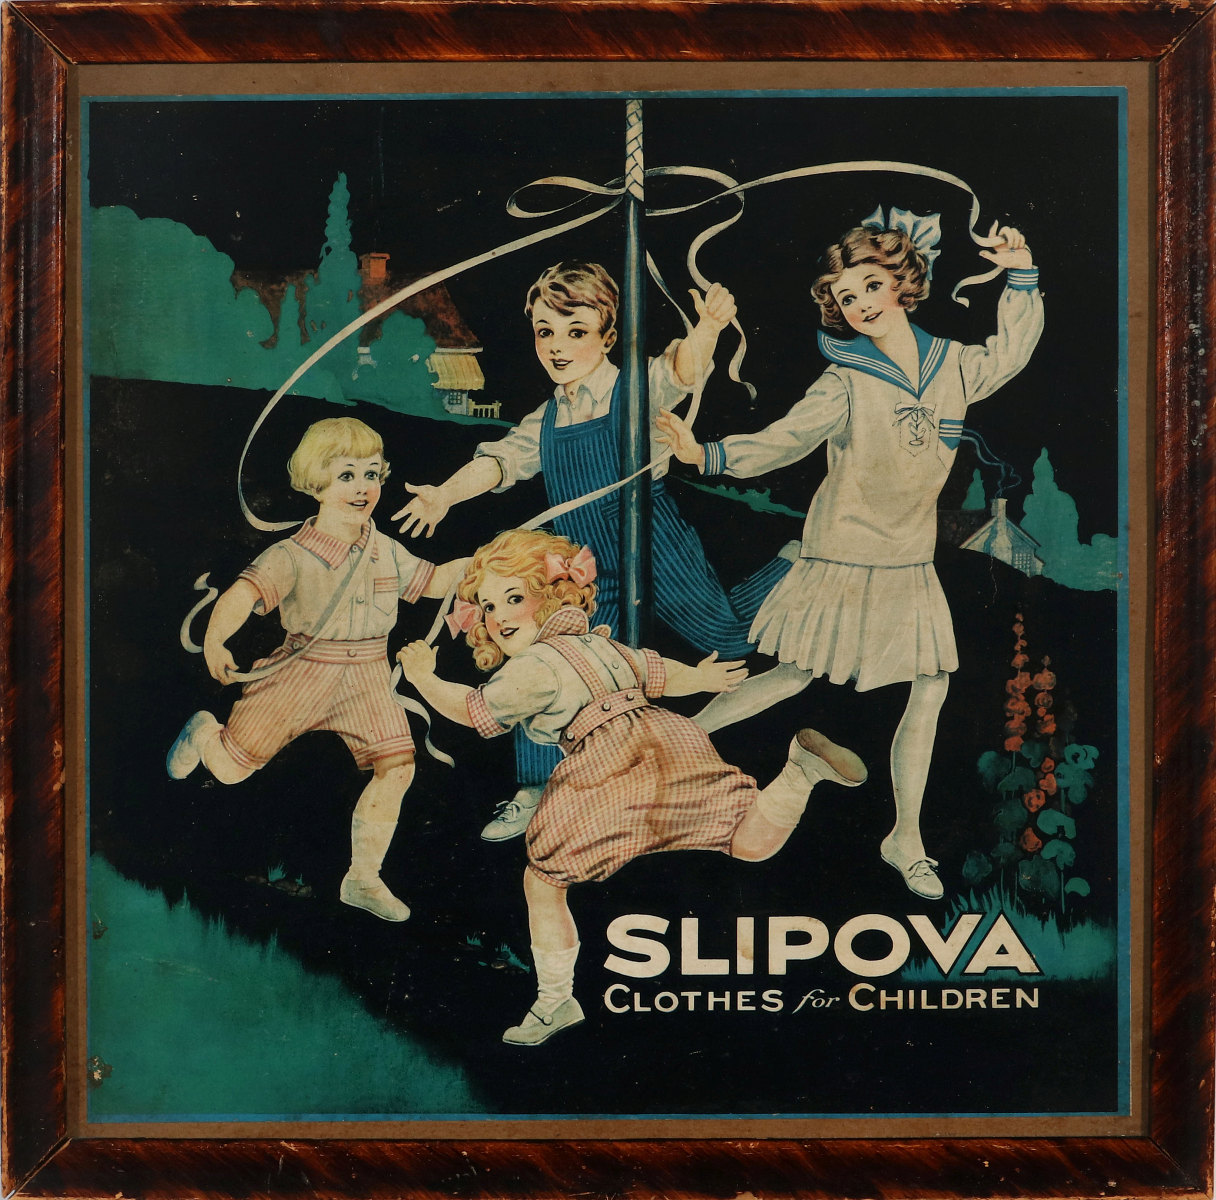 LITHOGRAPH ON PAPER SIGN FOR SLIPOVA CLOTHES